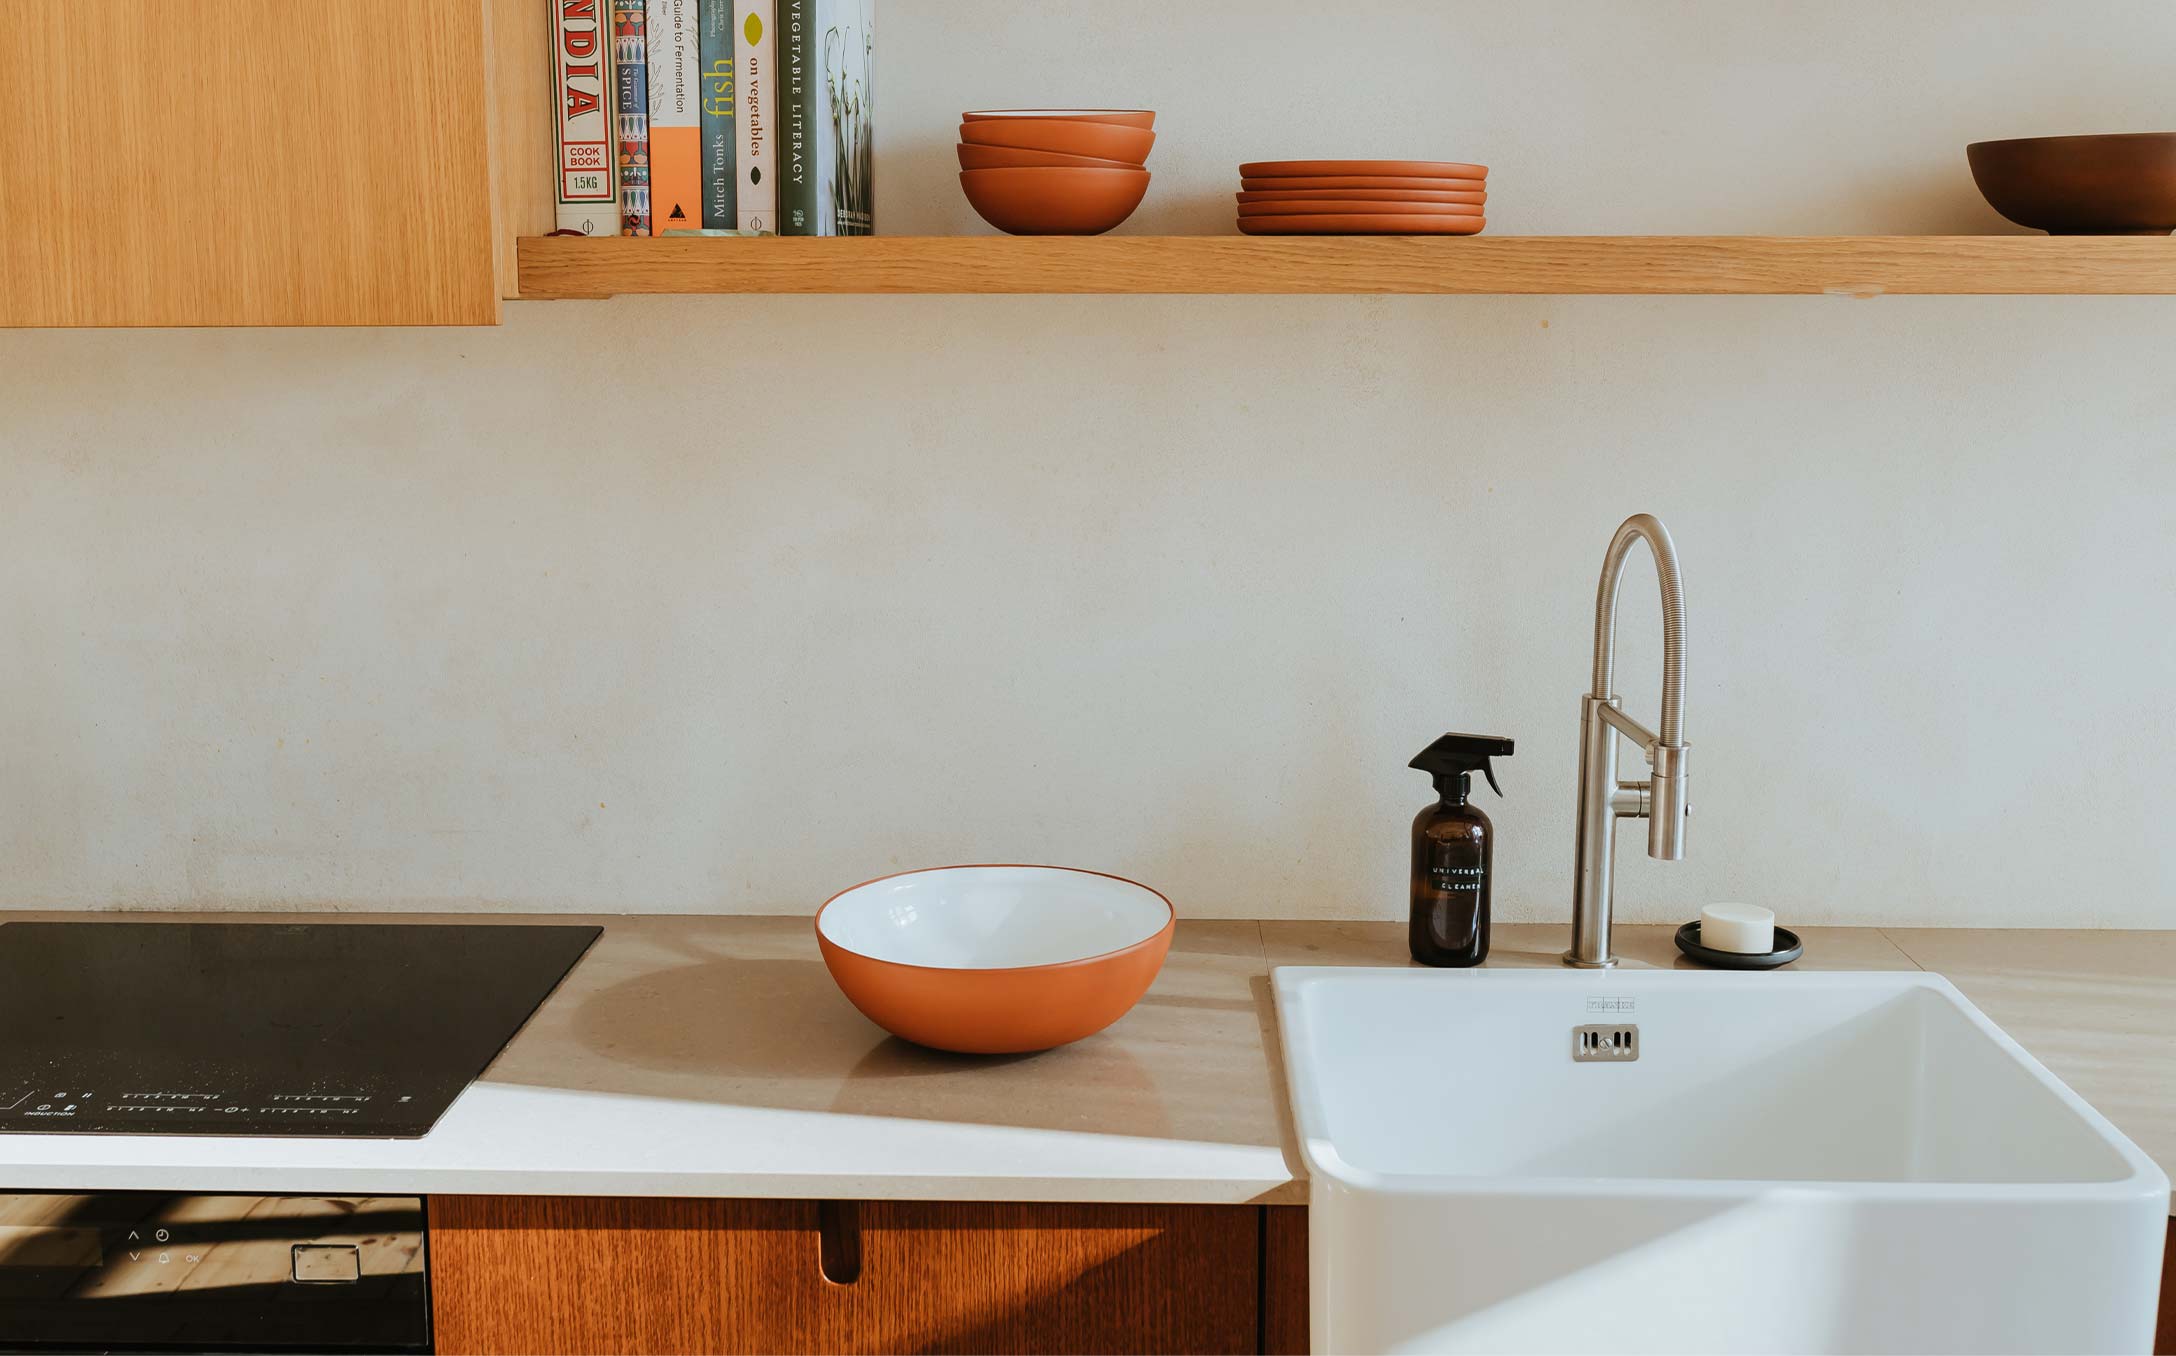 Kitchen countertop shot with a ceramic bowl